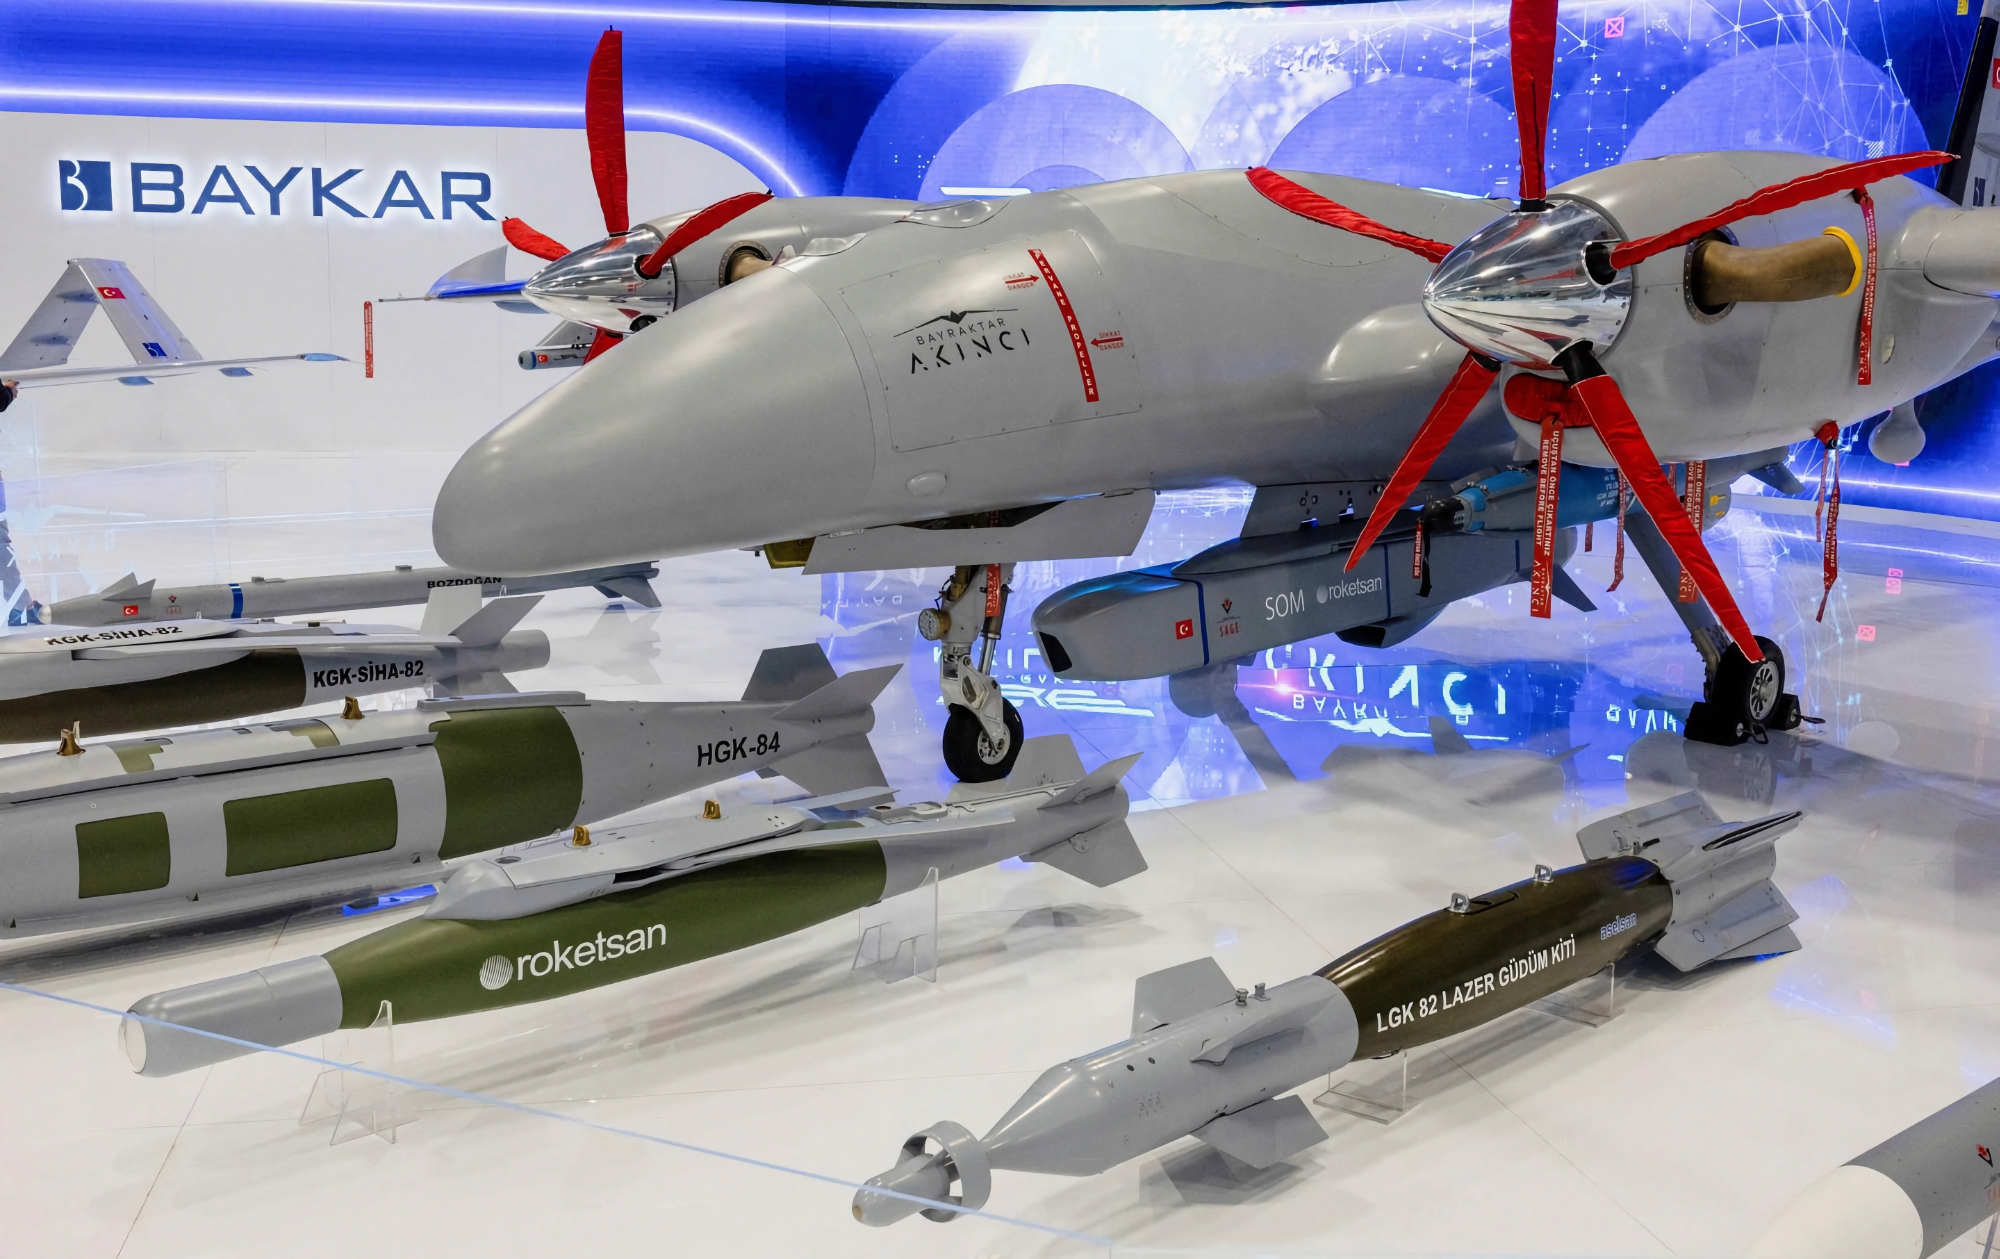 Not only TRLG-230 high-precision missiles for MLRS: Turkey transferred to Ukraine SUNGUR air-to-air missiles for Bayraktar TB2, they can shoot down Iranian drones Shahed 136